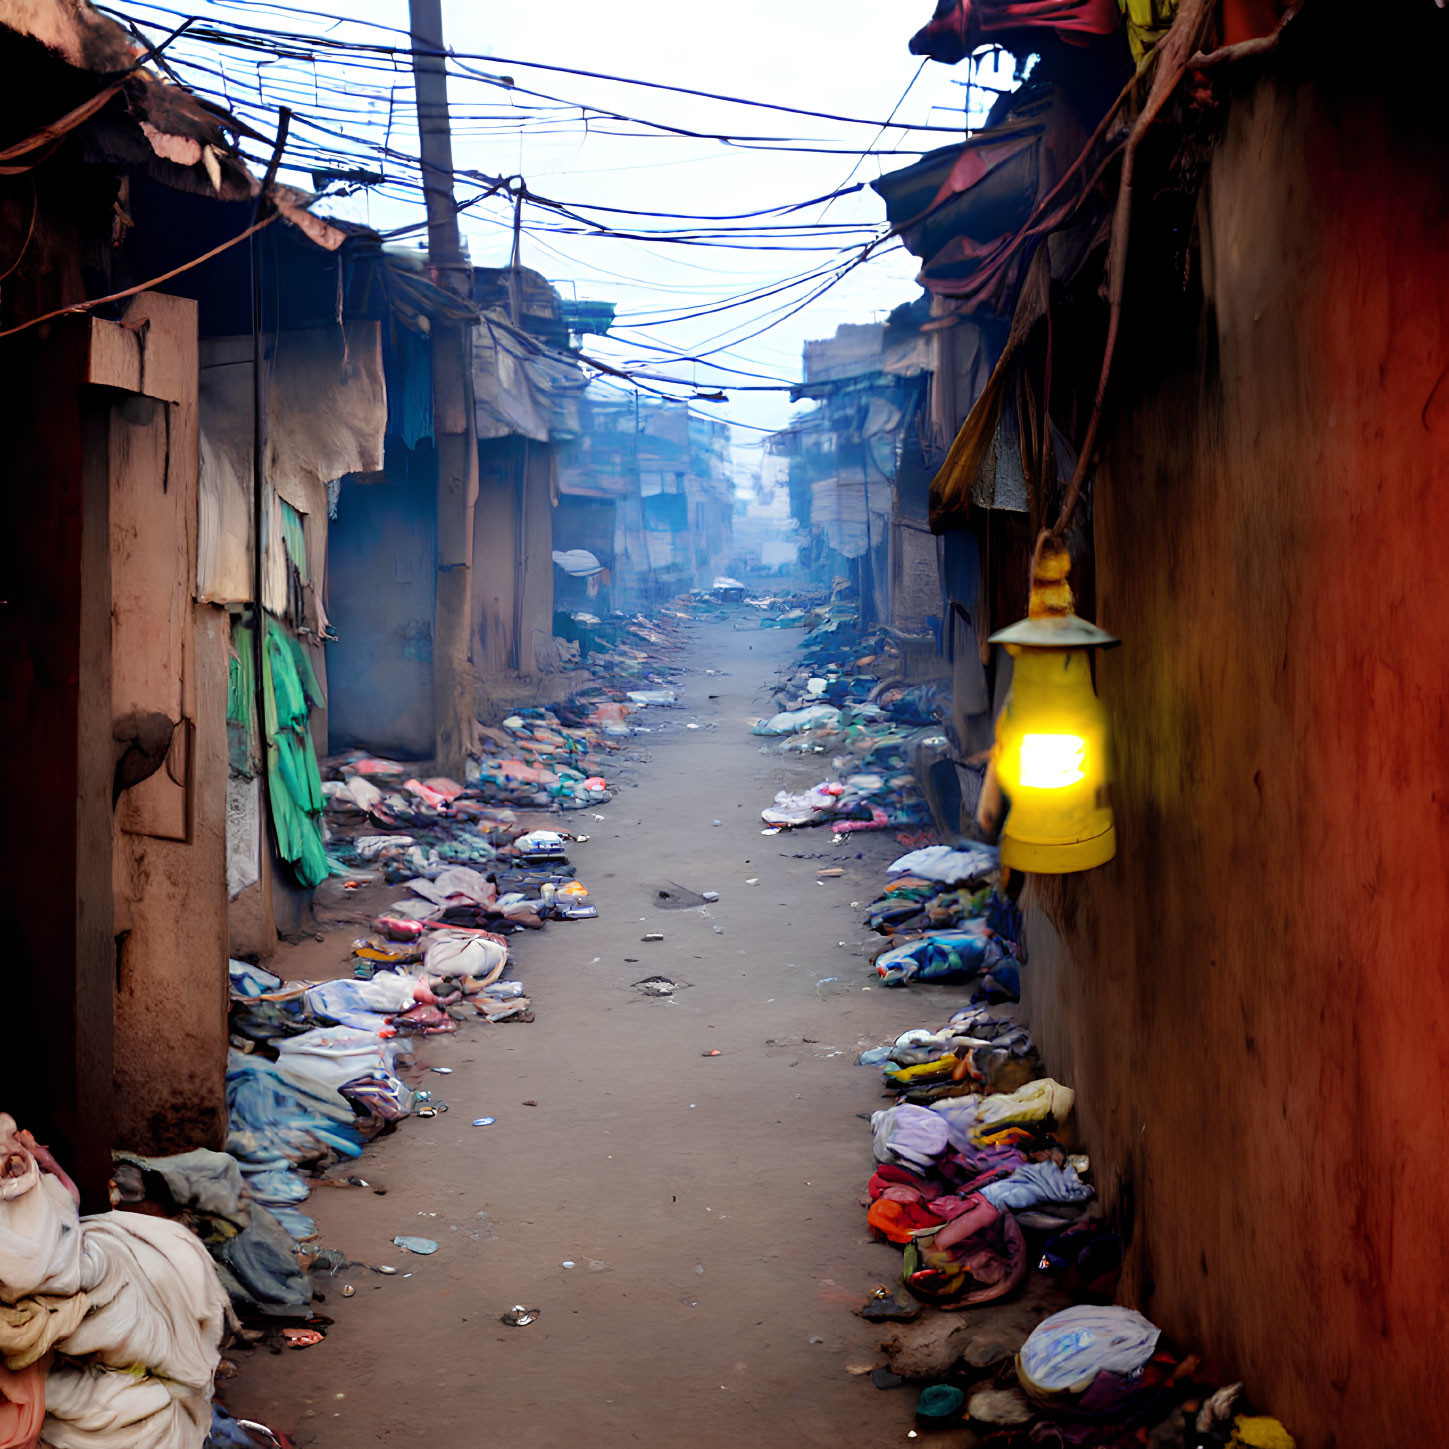 Cluttered garments in narrow slum alleyway with yellow lantern and overhead wires